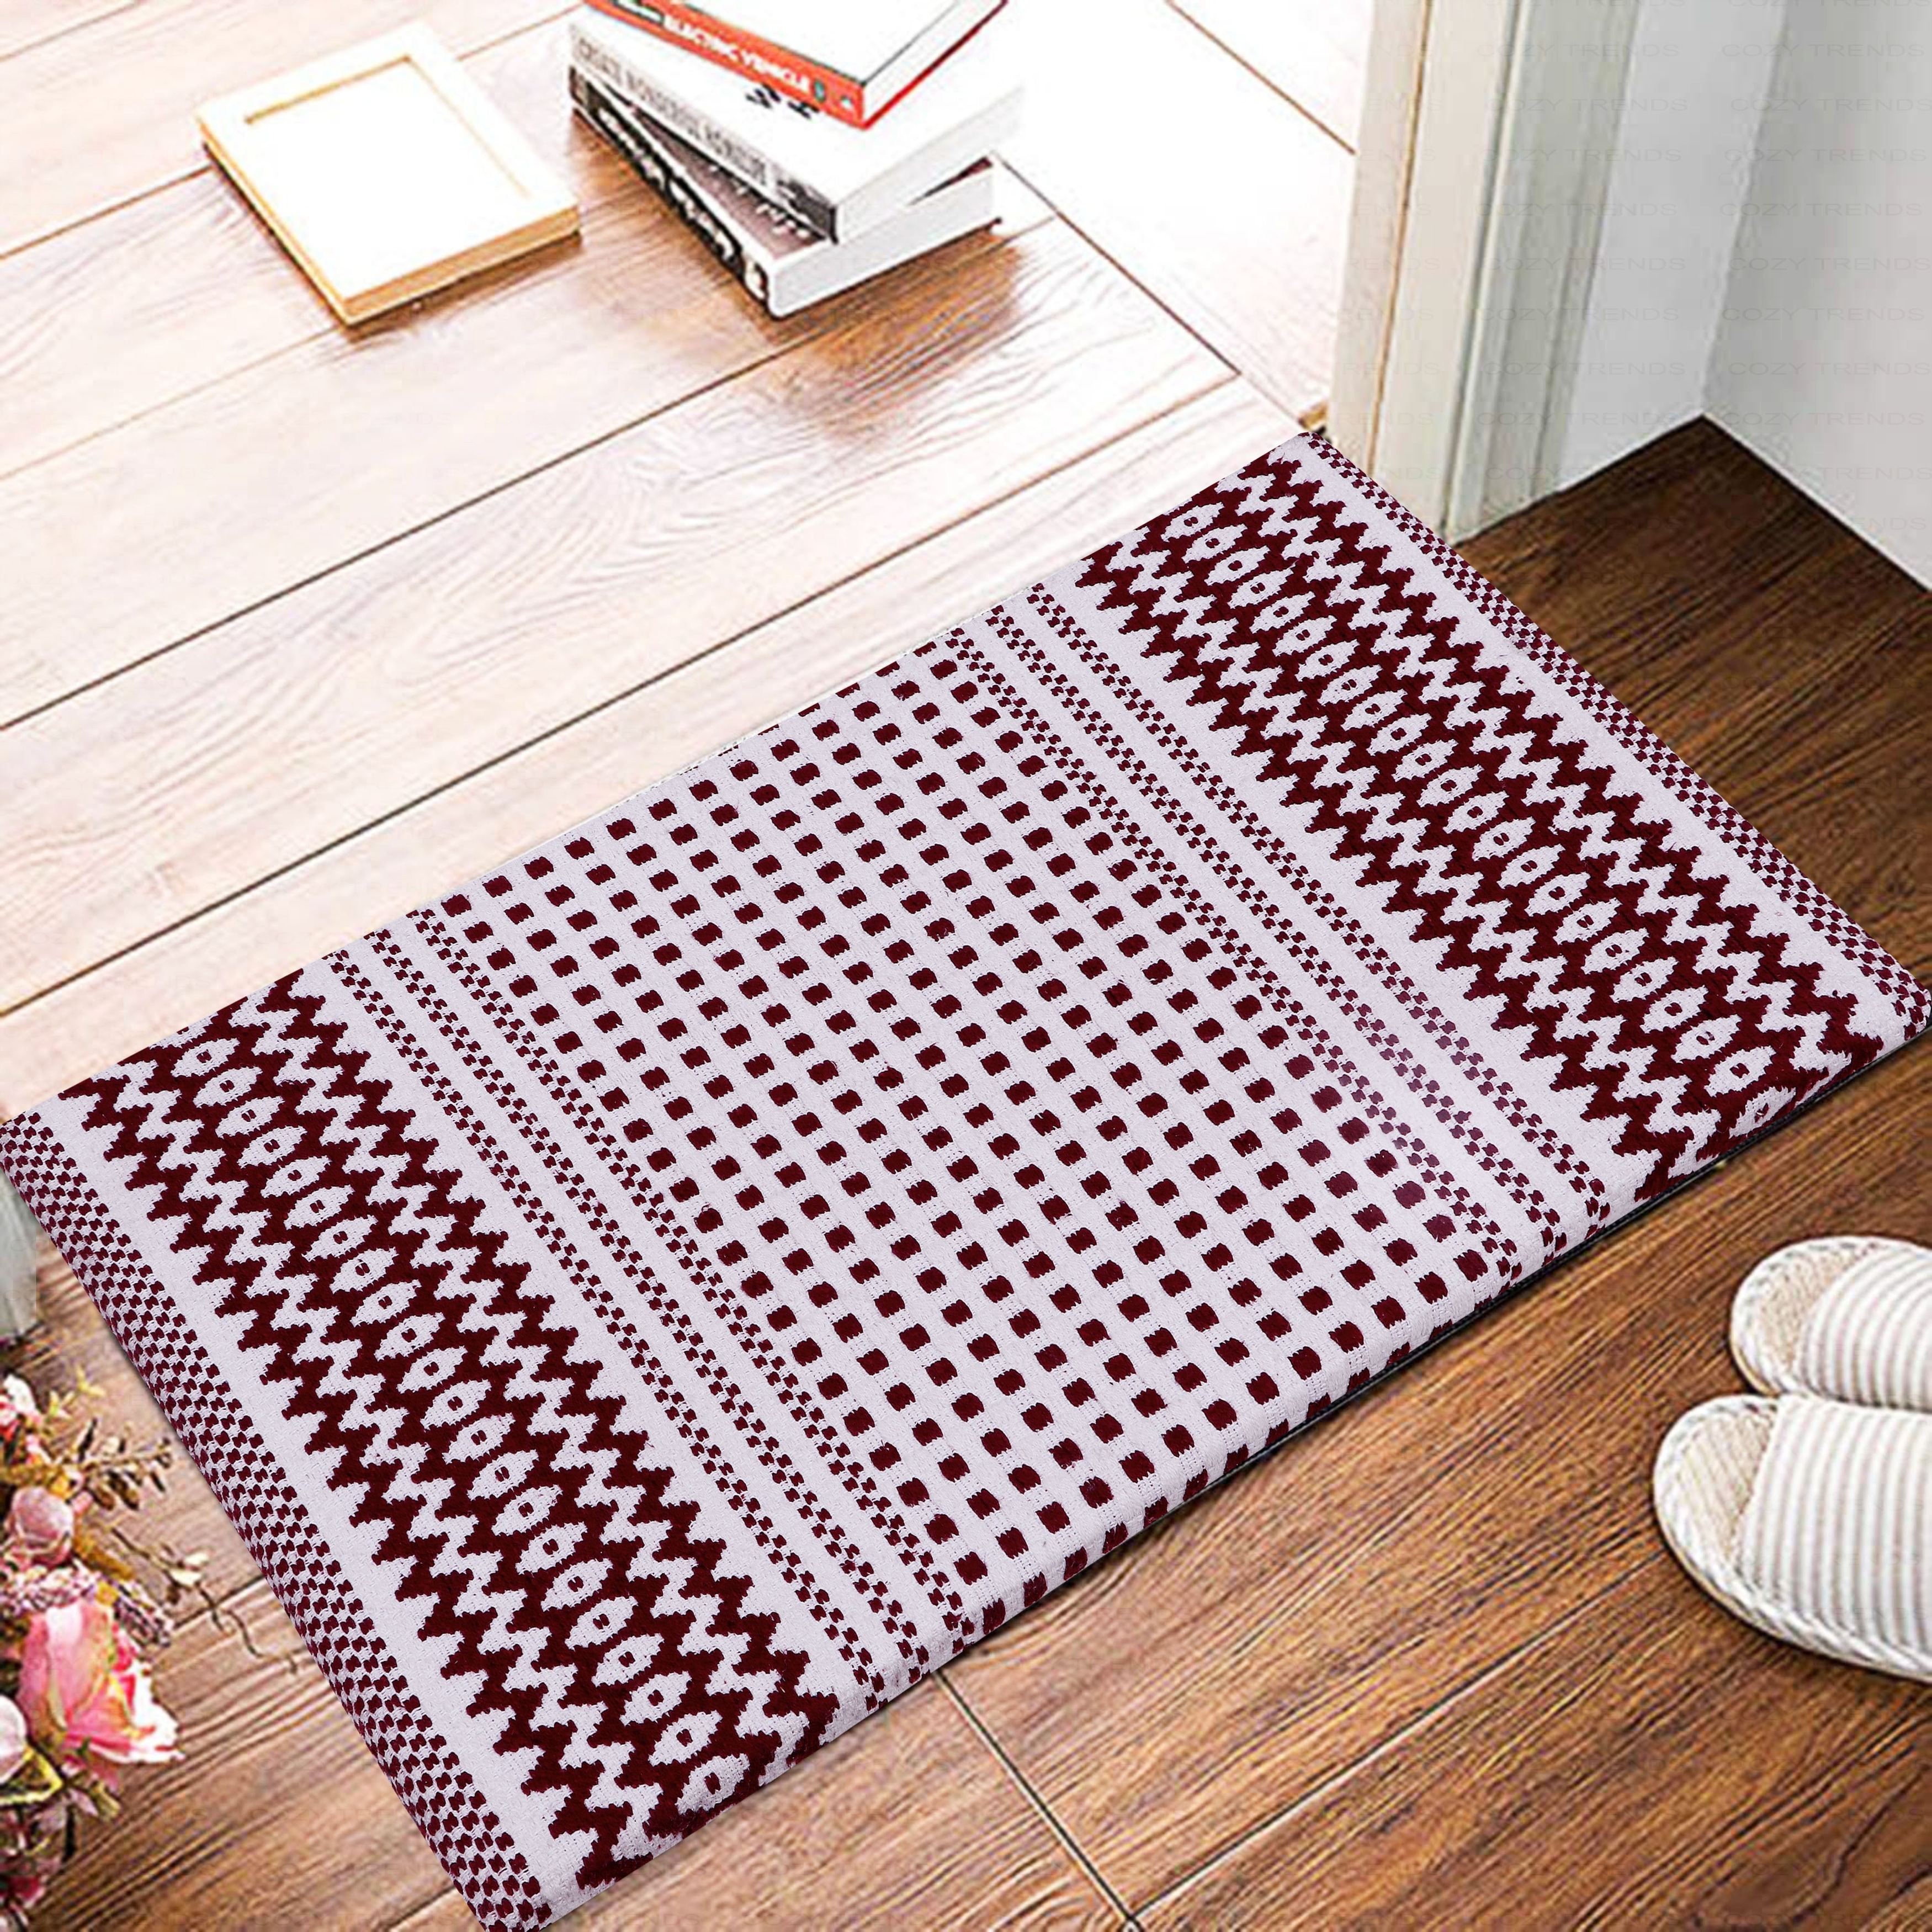 GMMGLT Kitchen Mat Cushioned Anti-Fatigue Kitchen Rug, Non-Slip Kitchen Mats and Rugs Comfort Foam Rug for Kitchen, Floor Home, Office, Sink, Laundry - 15.8